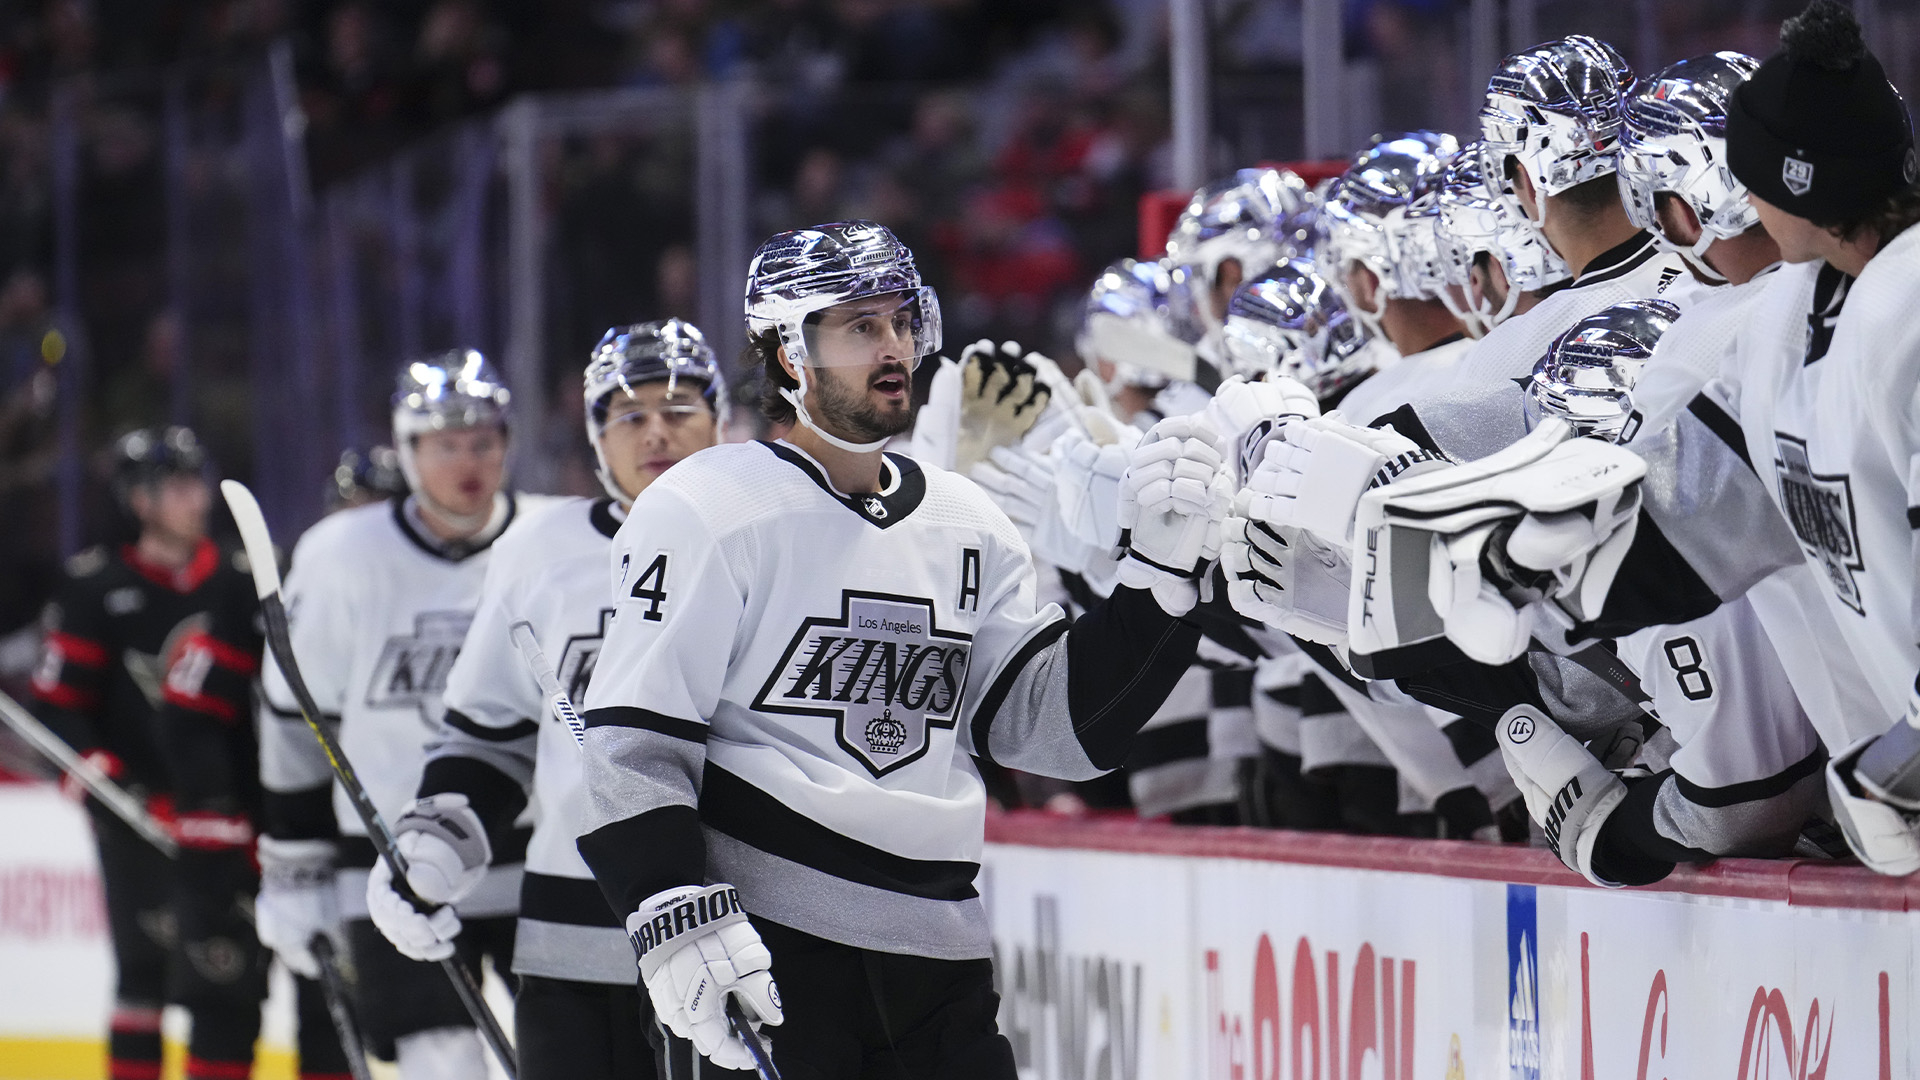 The Kings will play two preseason games in Quebec